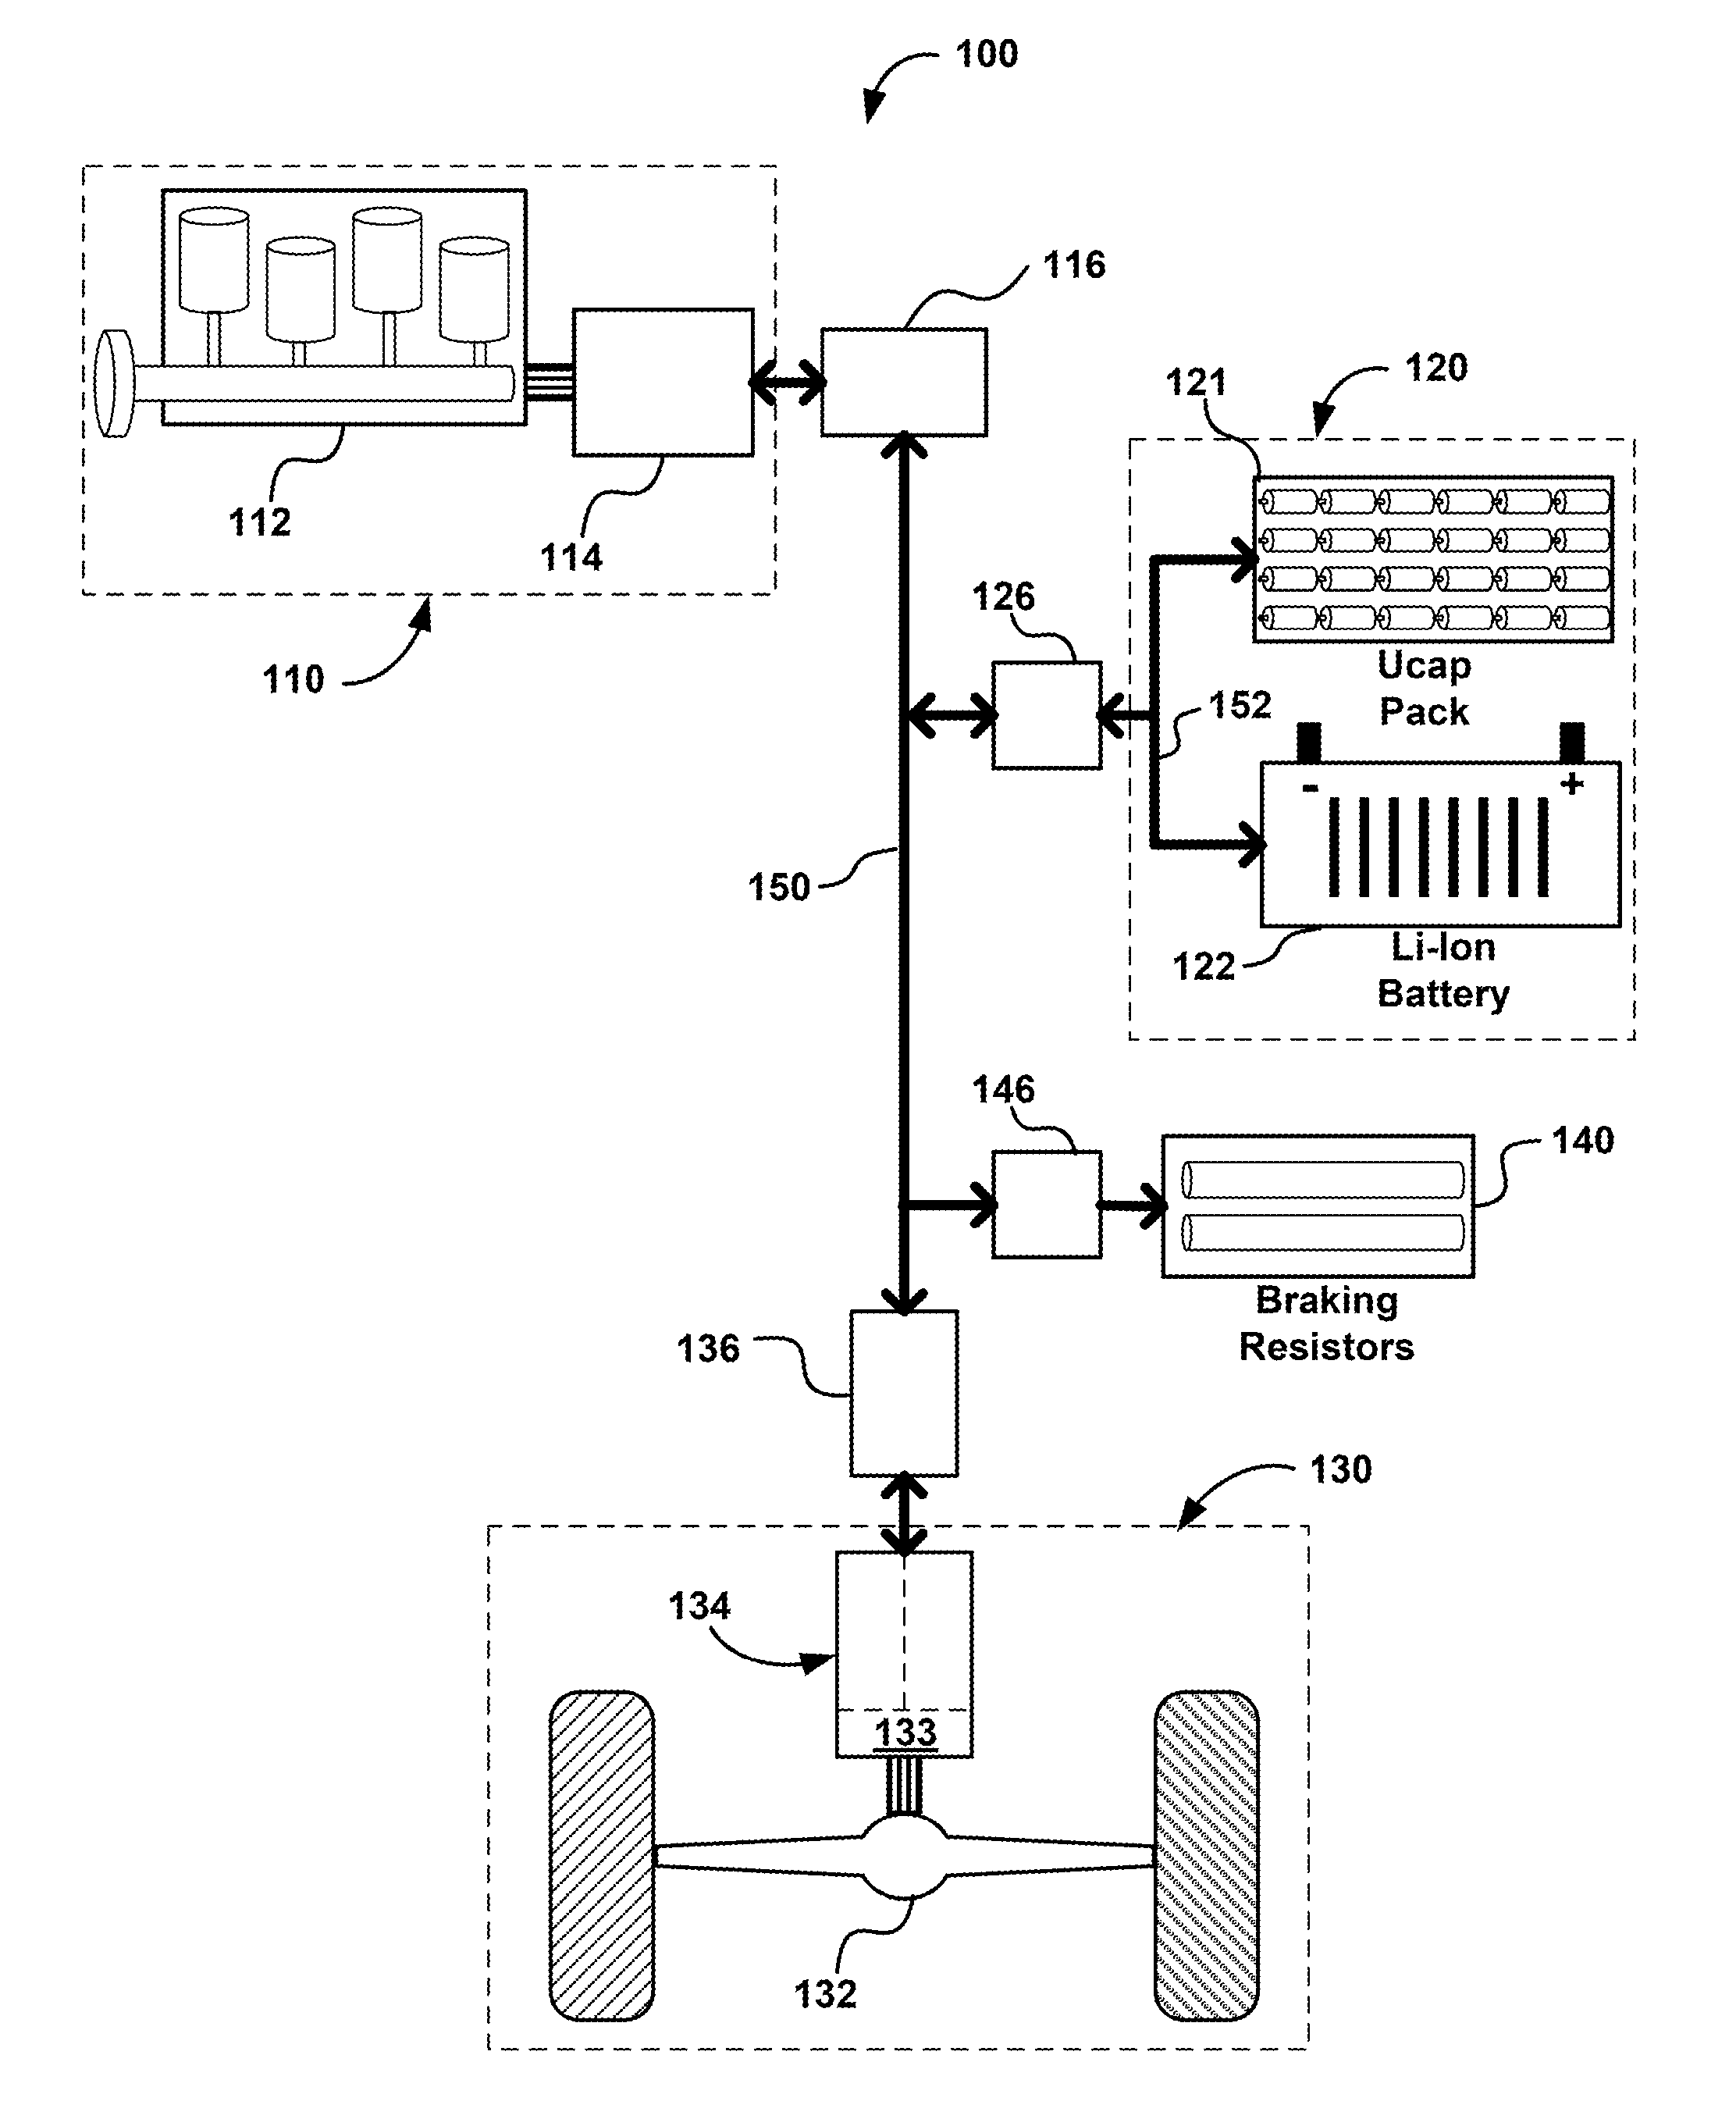 Expandable energy storage control system architecture